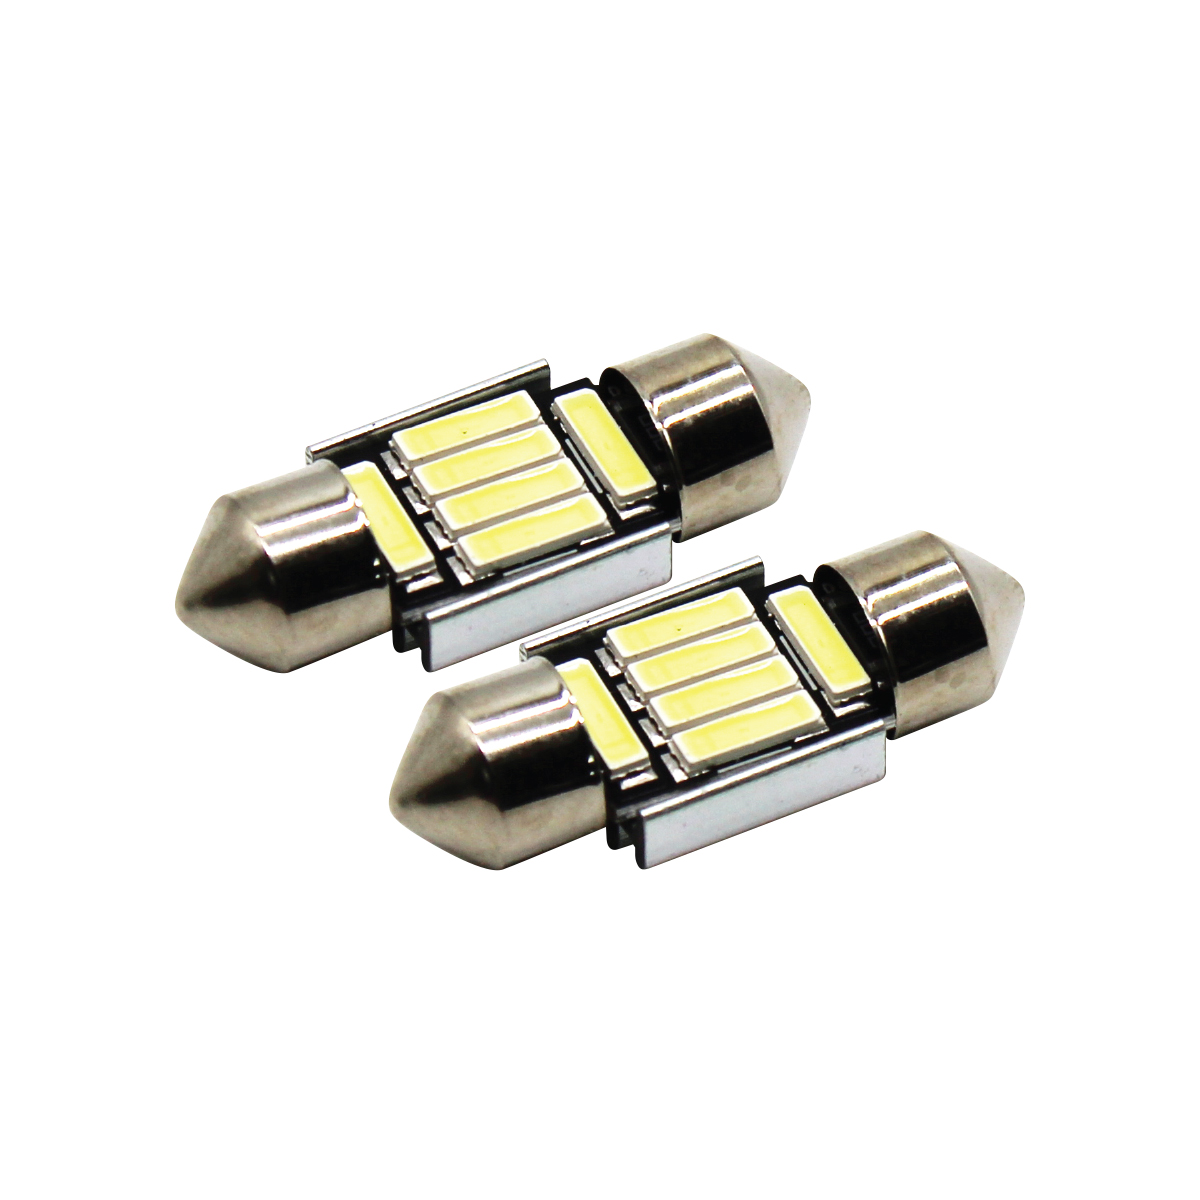 INTERIOR CANBUS 6 SMD 31 MM BULBS-31SJ-7020-6SMD